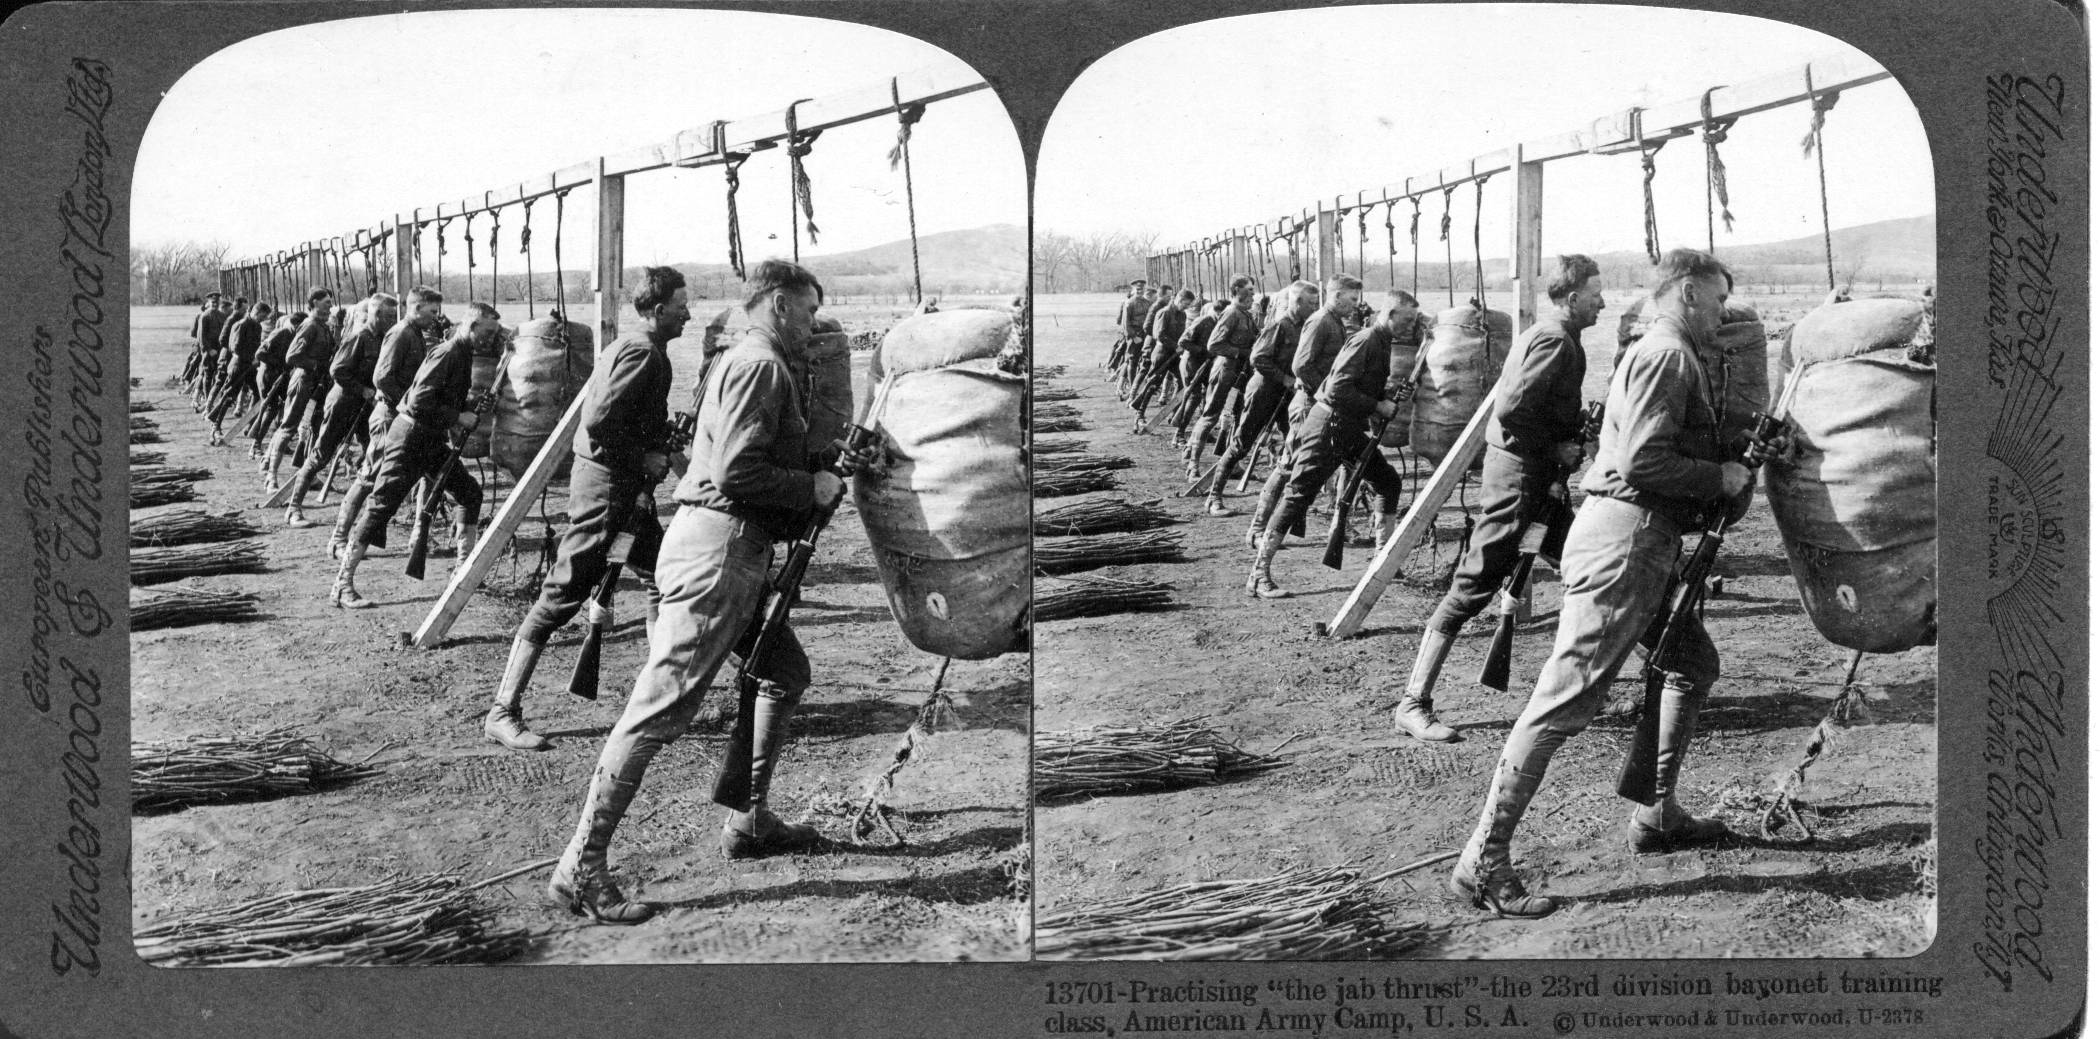 Practising "the jab thrust"-the 23rd division bayonet training class, American Army Camp, U.S.A.